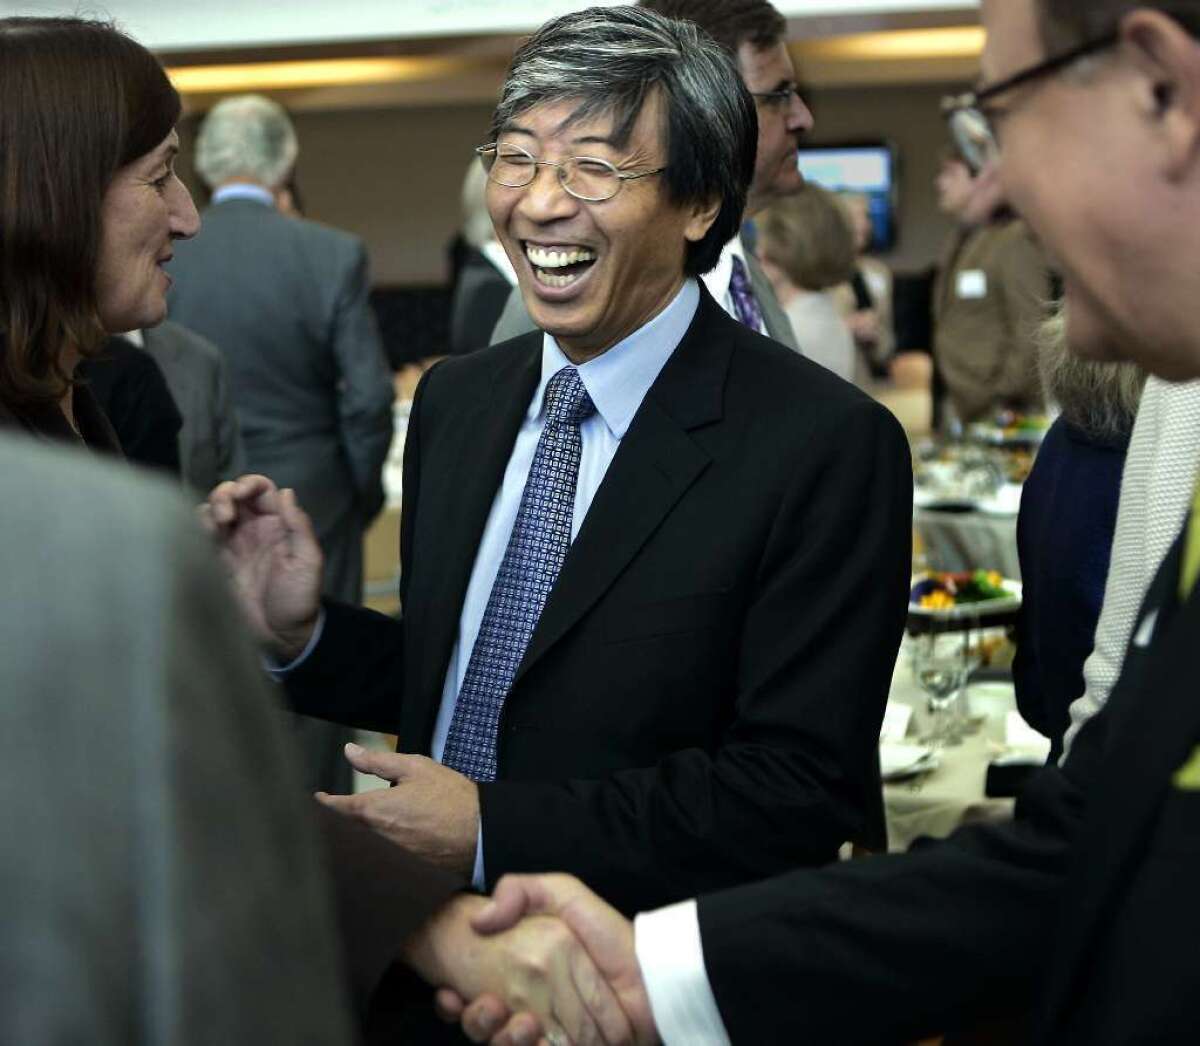 Patrick Soon-Shiong is a doctor and entrepreneur whose start-up company, NantHealth, seeks to use medical data and genetic information to find personalized cancer treatments.